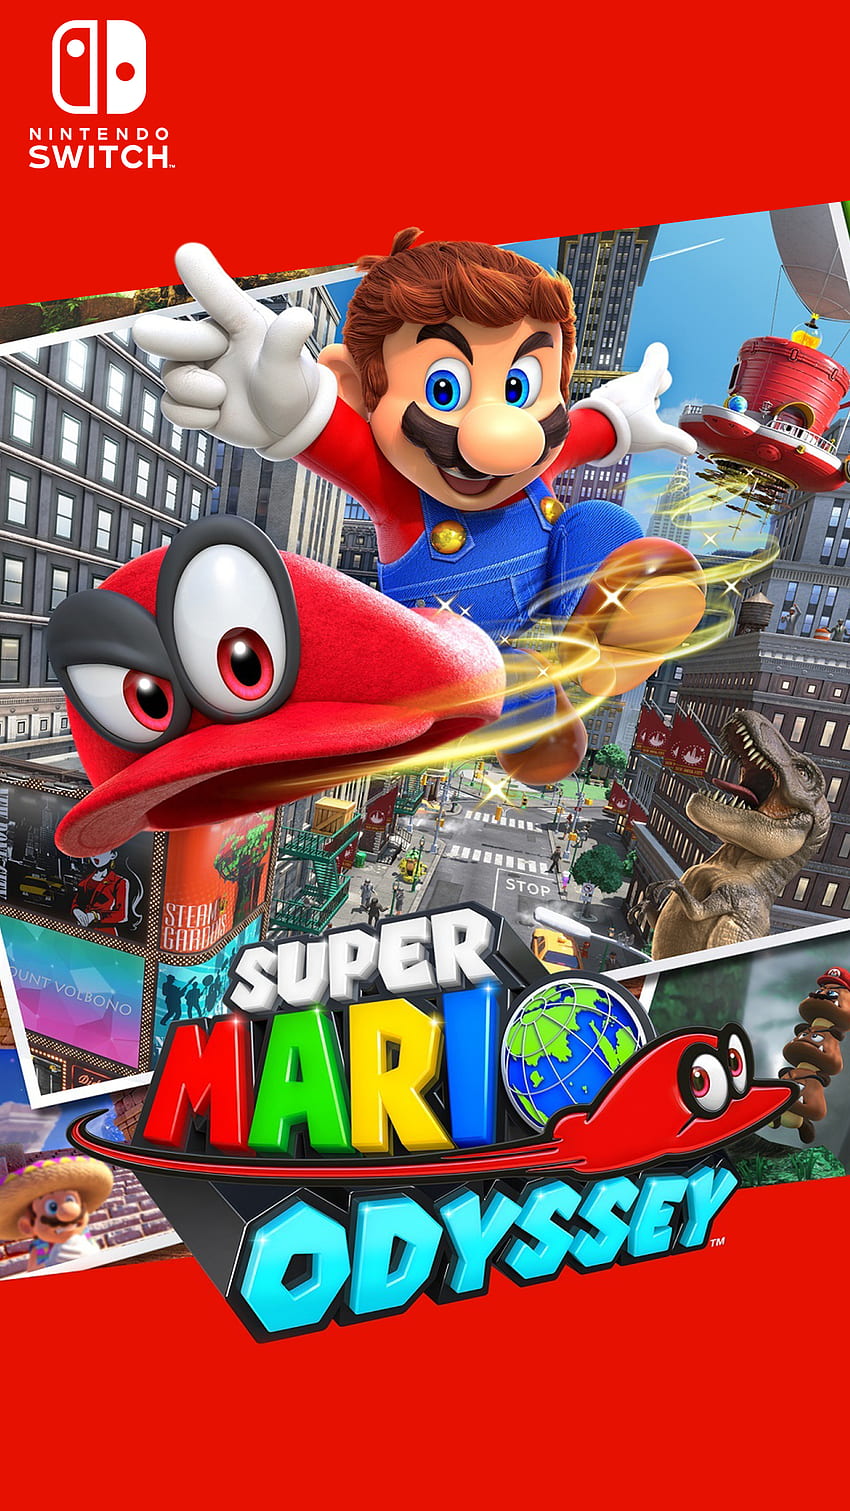 1080x1920 Super Mario Odyssey 8k Iphone 7,6s,6 Plus, Pixel xl ,One Plus  3,3t,5 HD 4k Wallpapers, Images, Backgrounds, Photos and Pictures